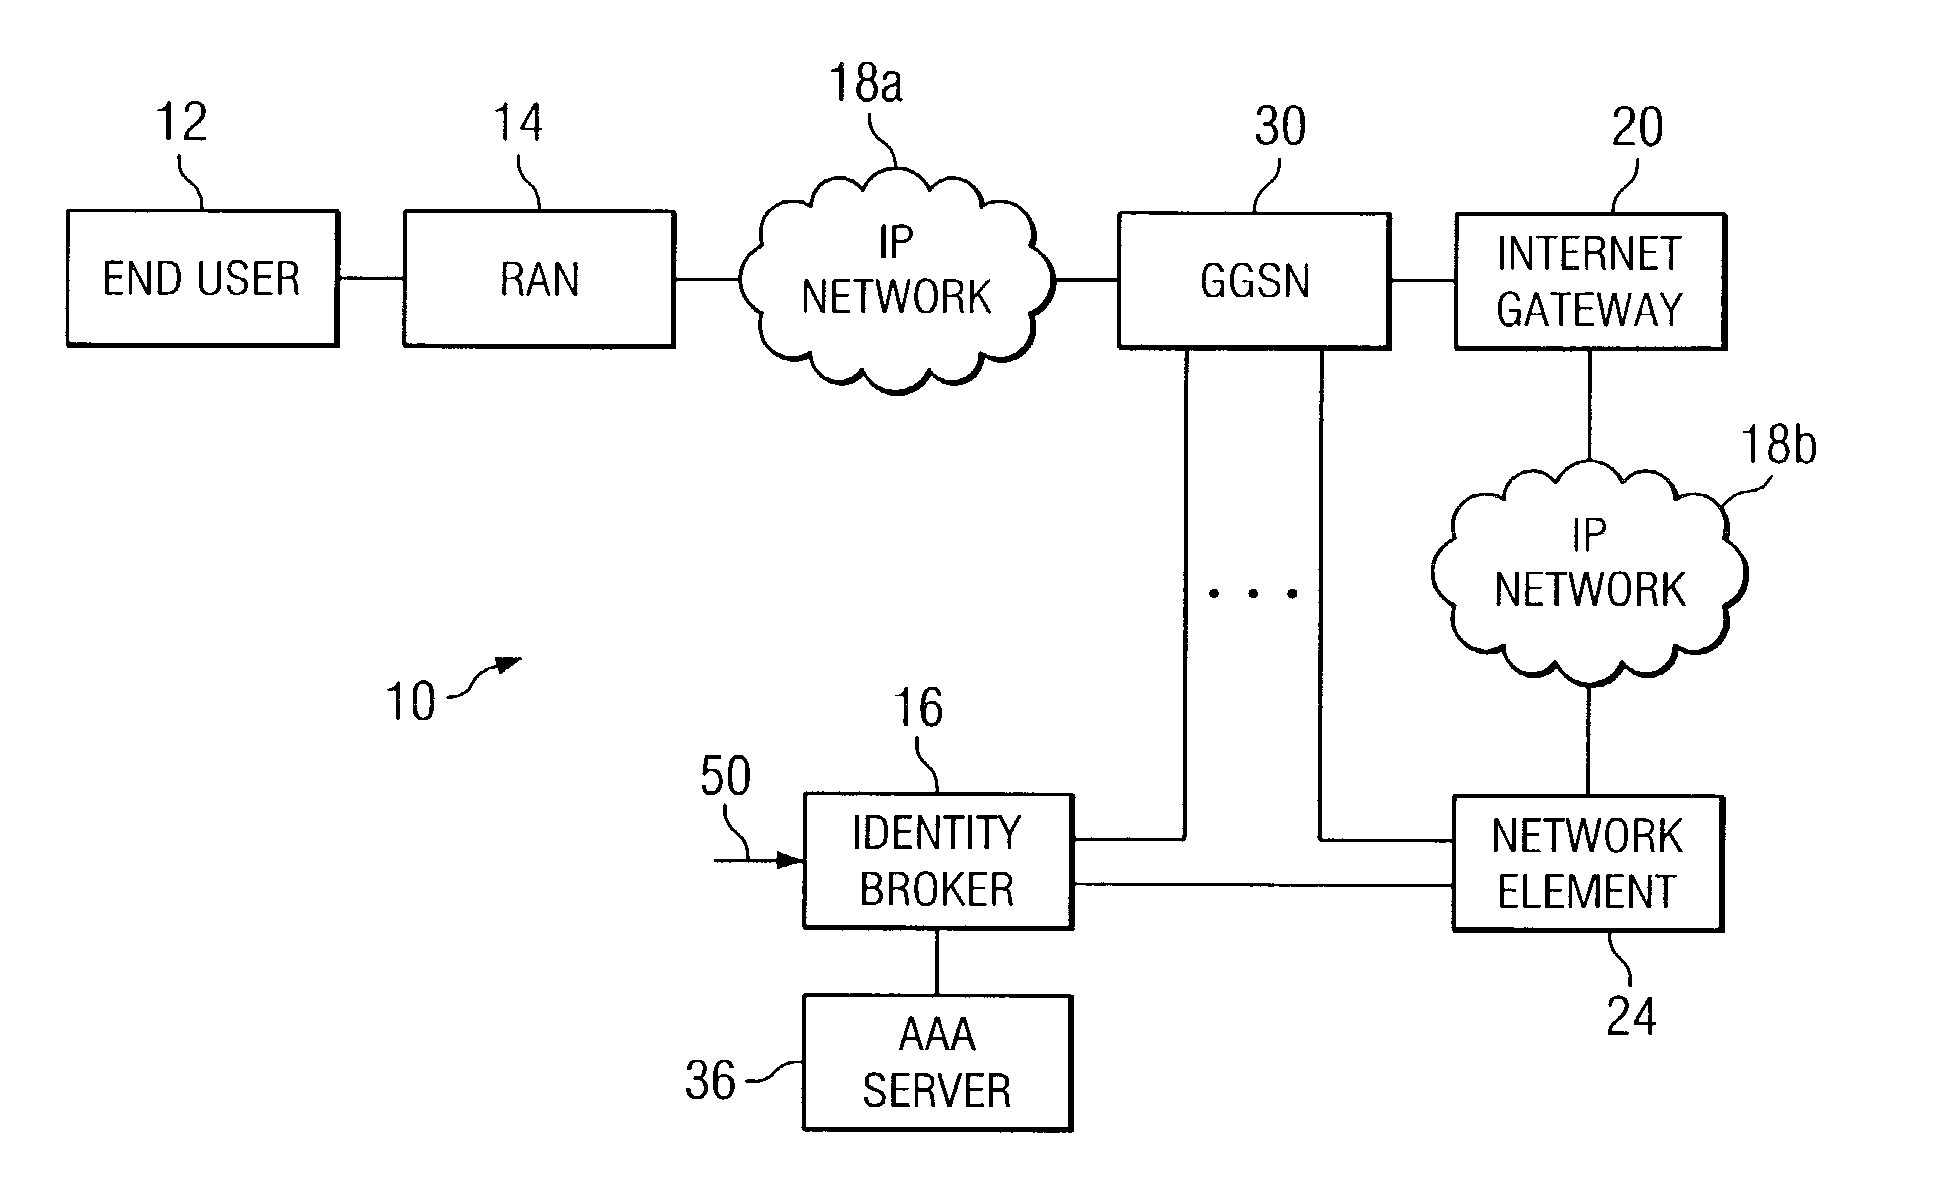 System and method for distributing information in a network environment